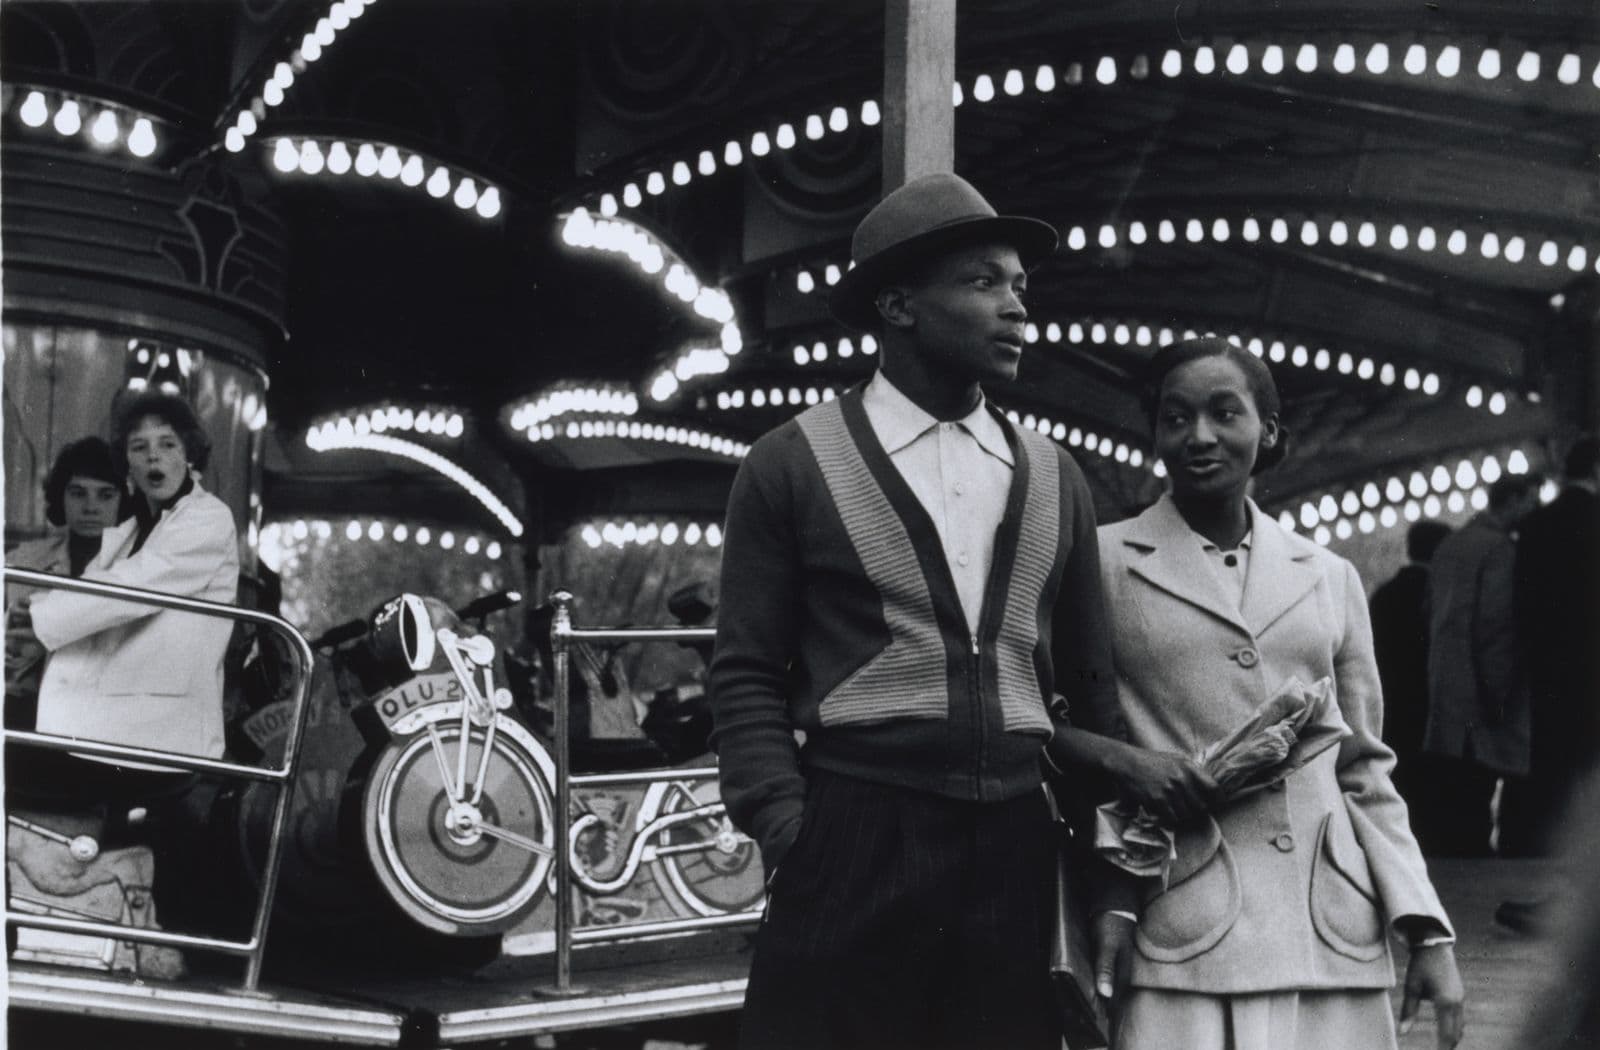 Black and white photograph of a man and a woman with linked arms in front of a carousel. In the background two women look on, one with a shocked expression